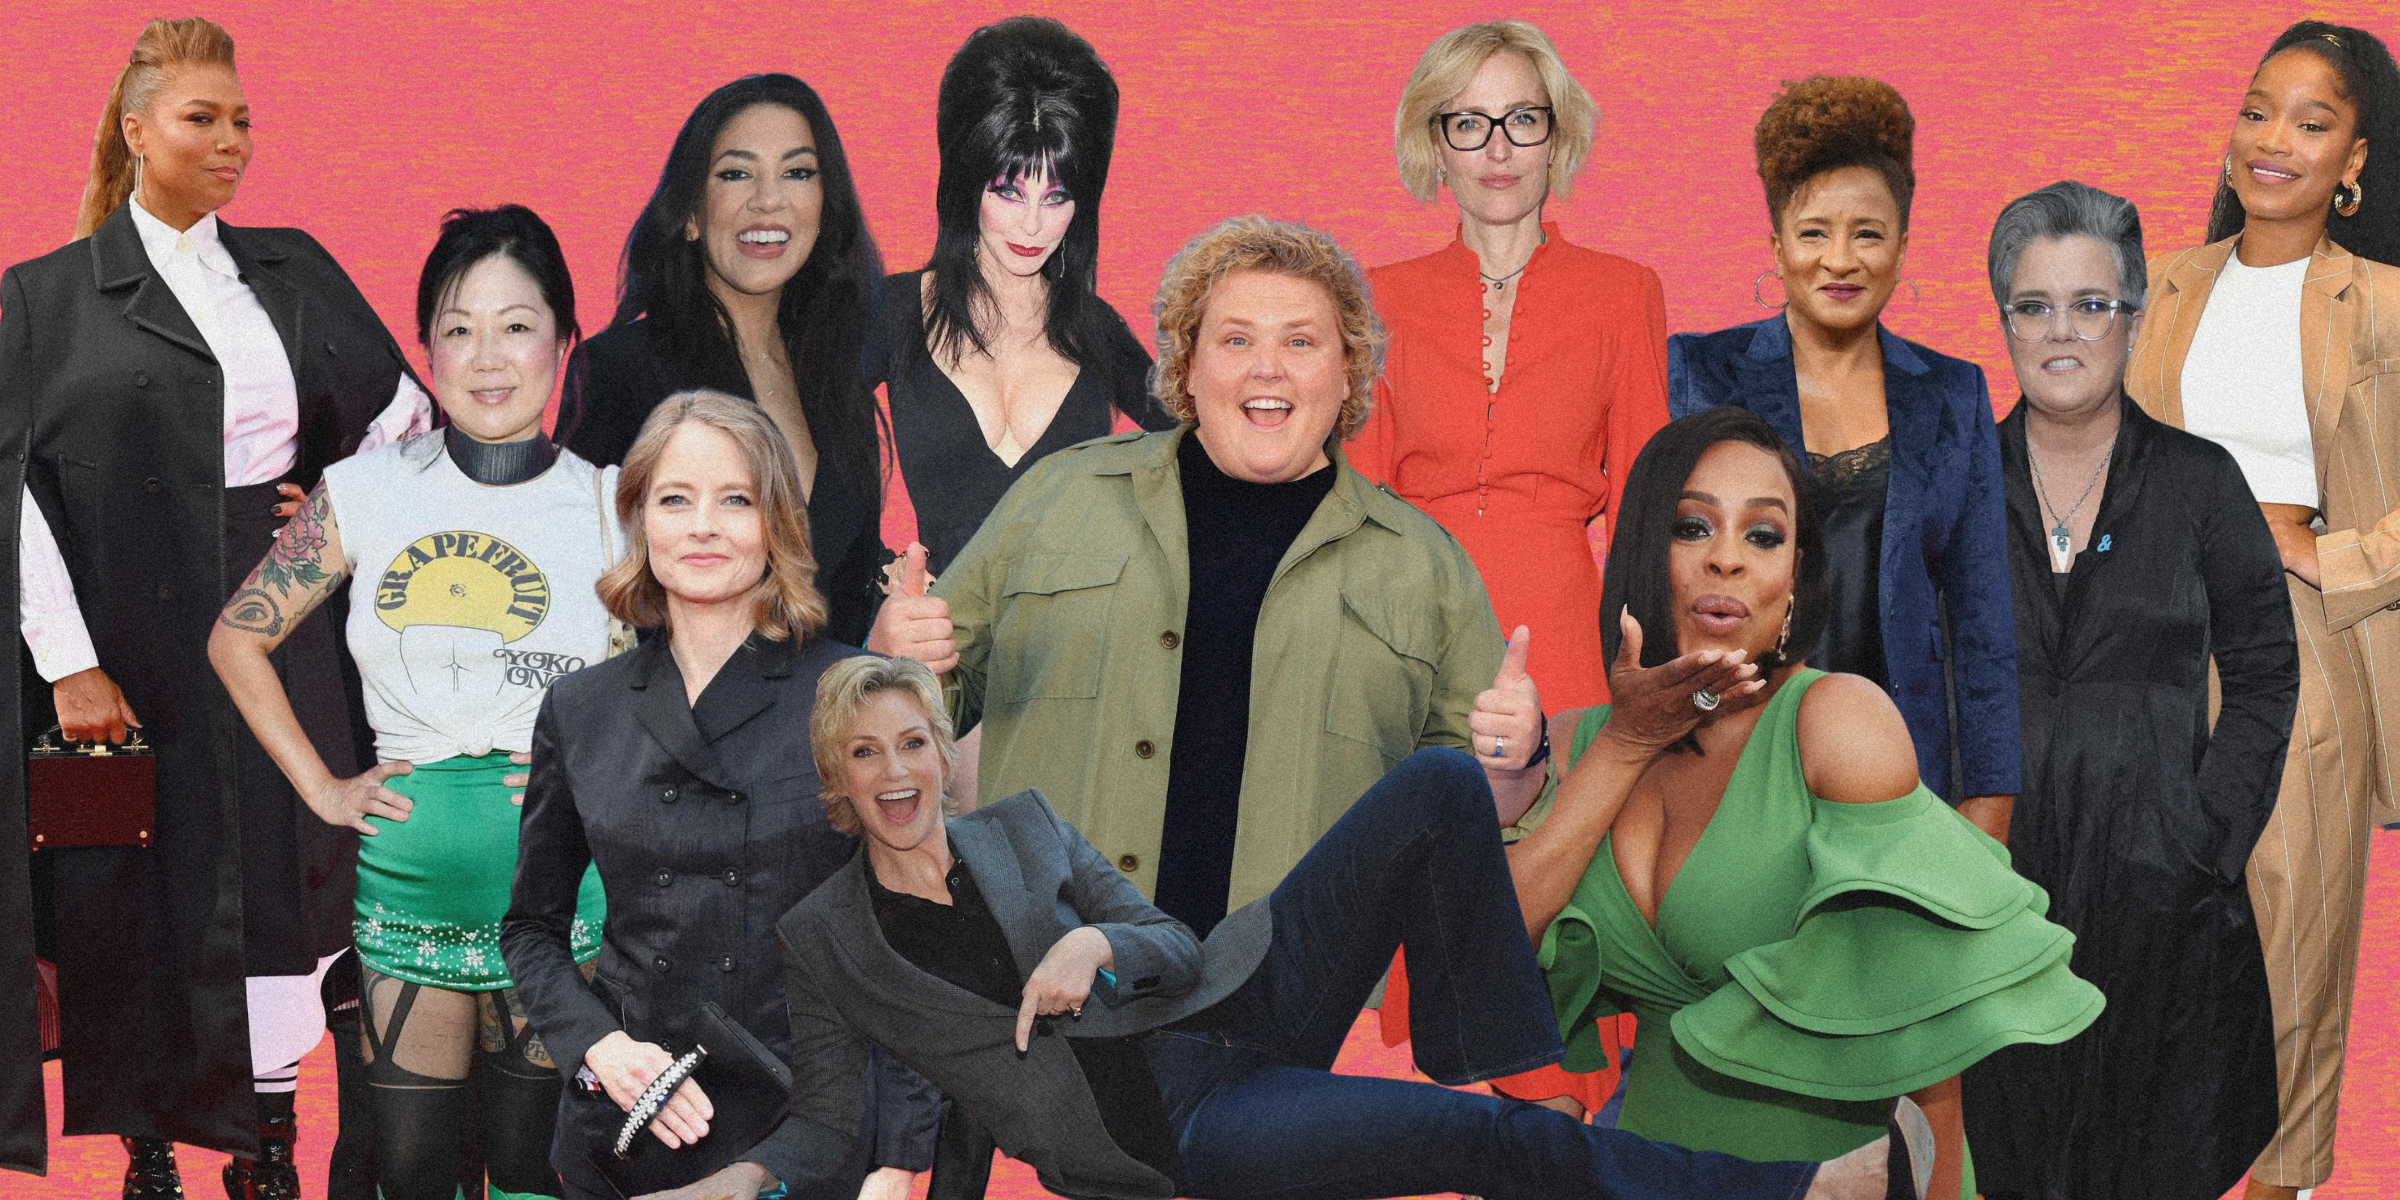 a collage of lesbian actors including rosie o'donnell, keke palmer, fortune feimster, jodi foster, stephanie beatriz, queen latifah, elviara, jane lynch and jodie foster